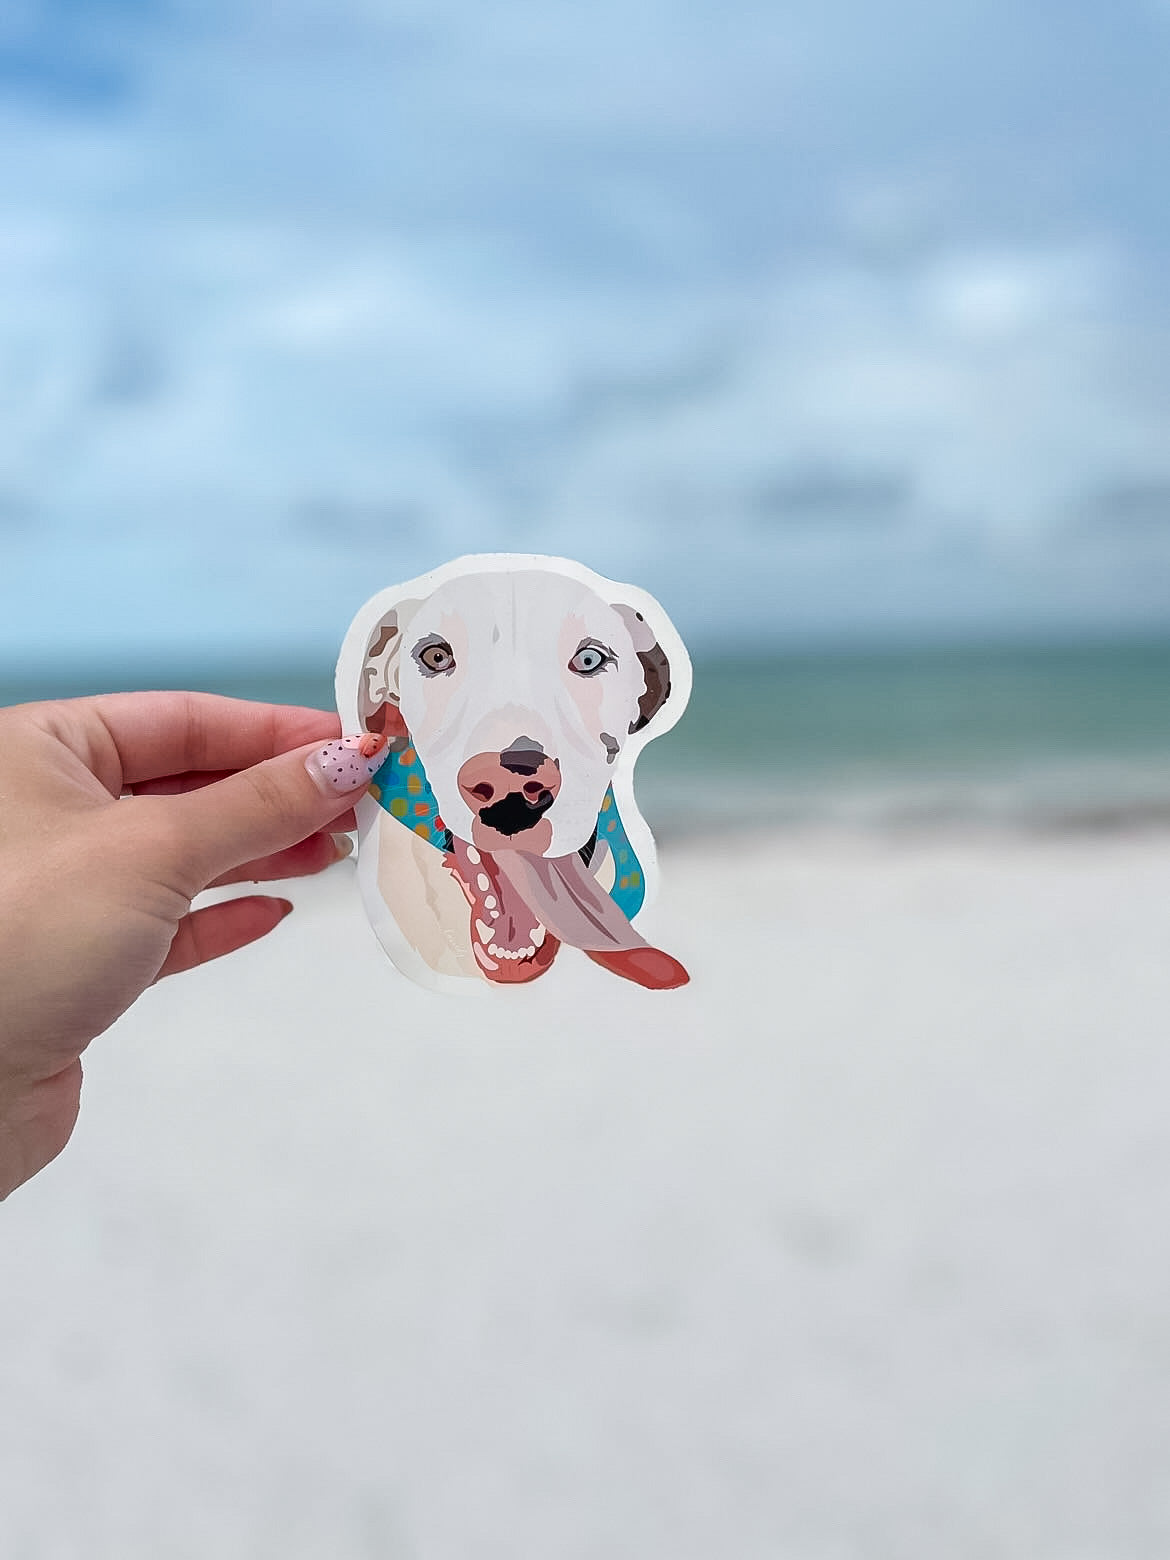 Custom pet portrait and sticker listing - personalized pet artwork and stickers for sale